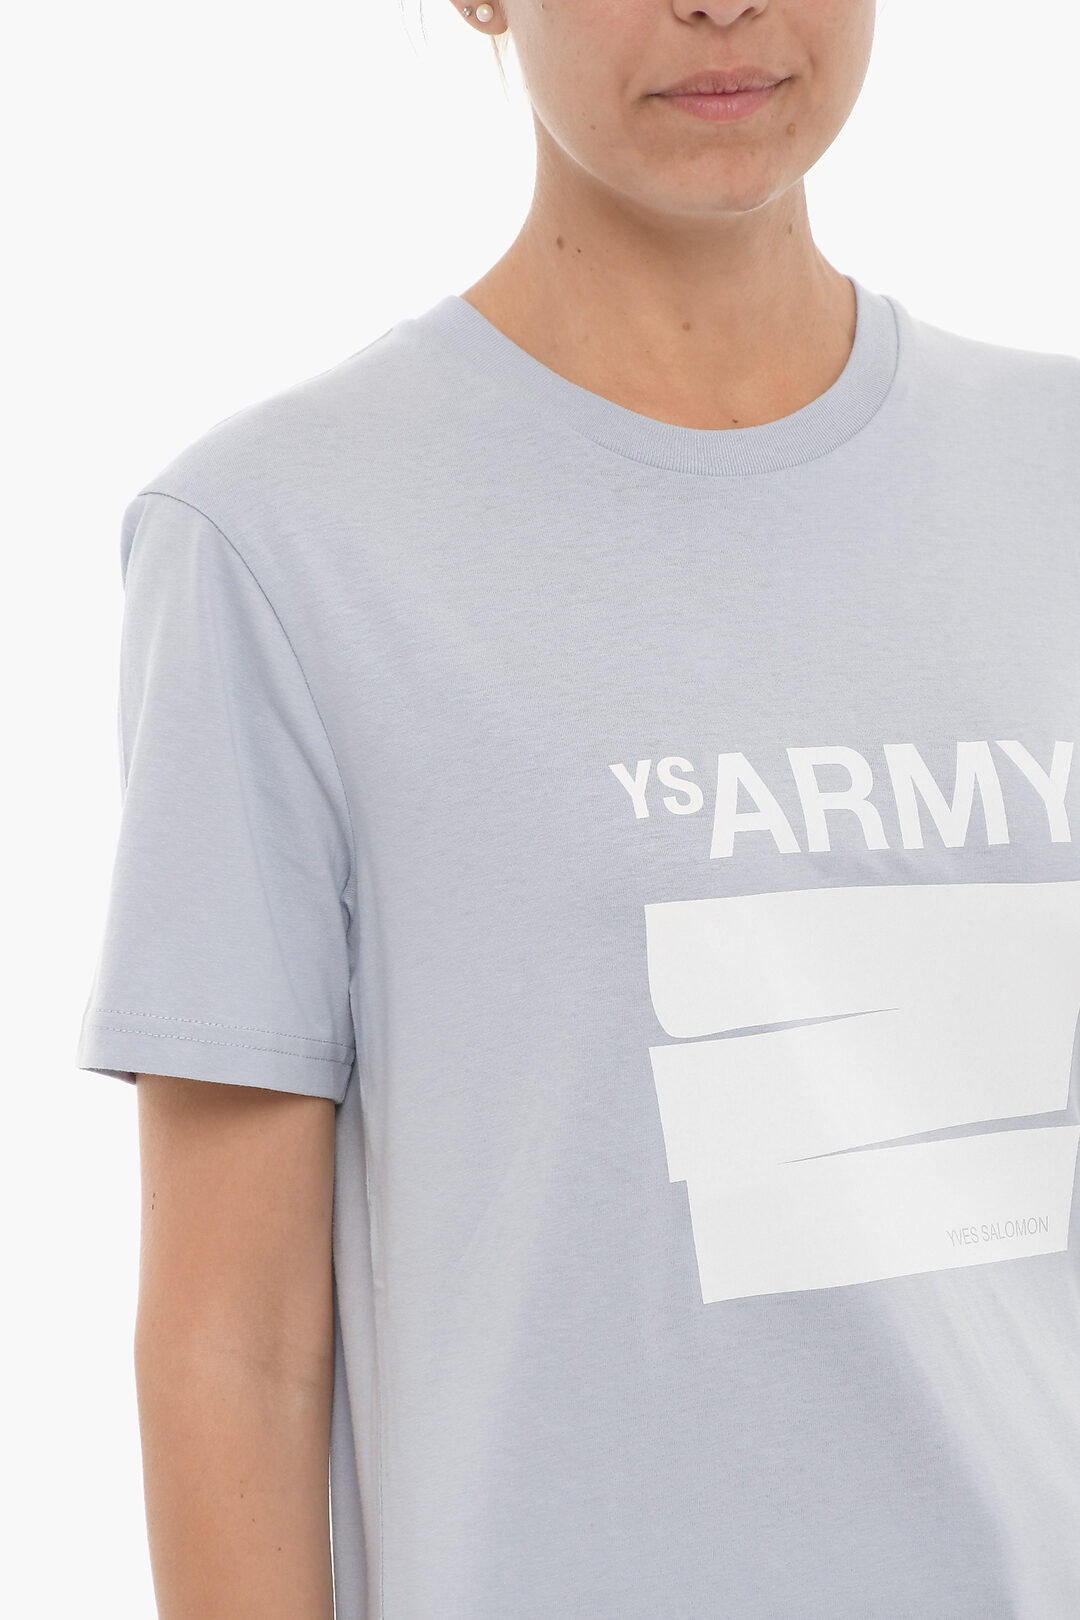 Yves Salomon ARMY Front Printed - Glamood Outlet